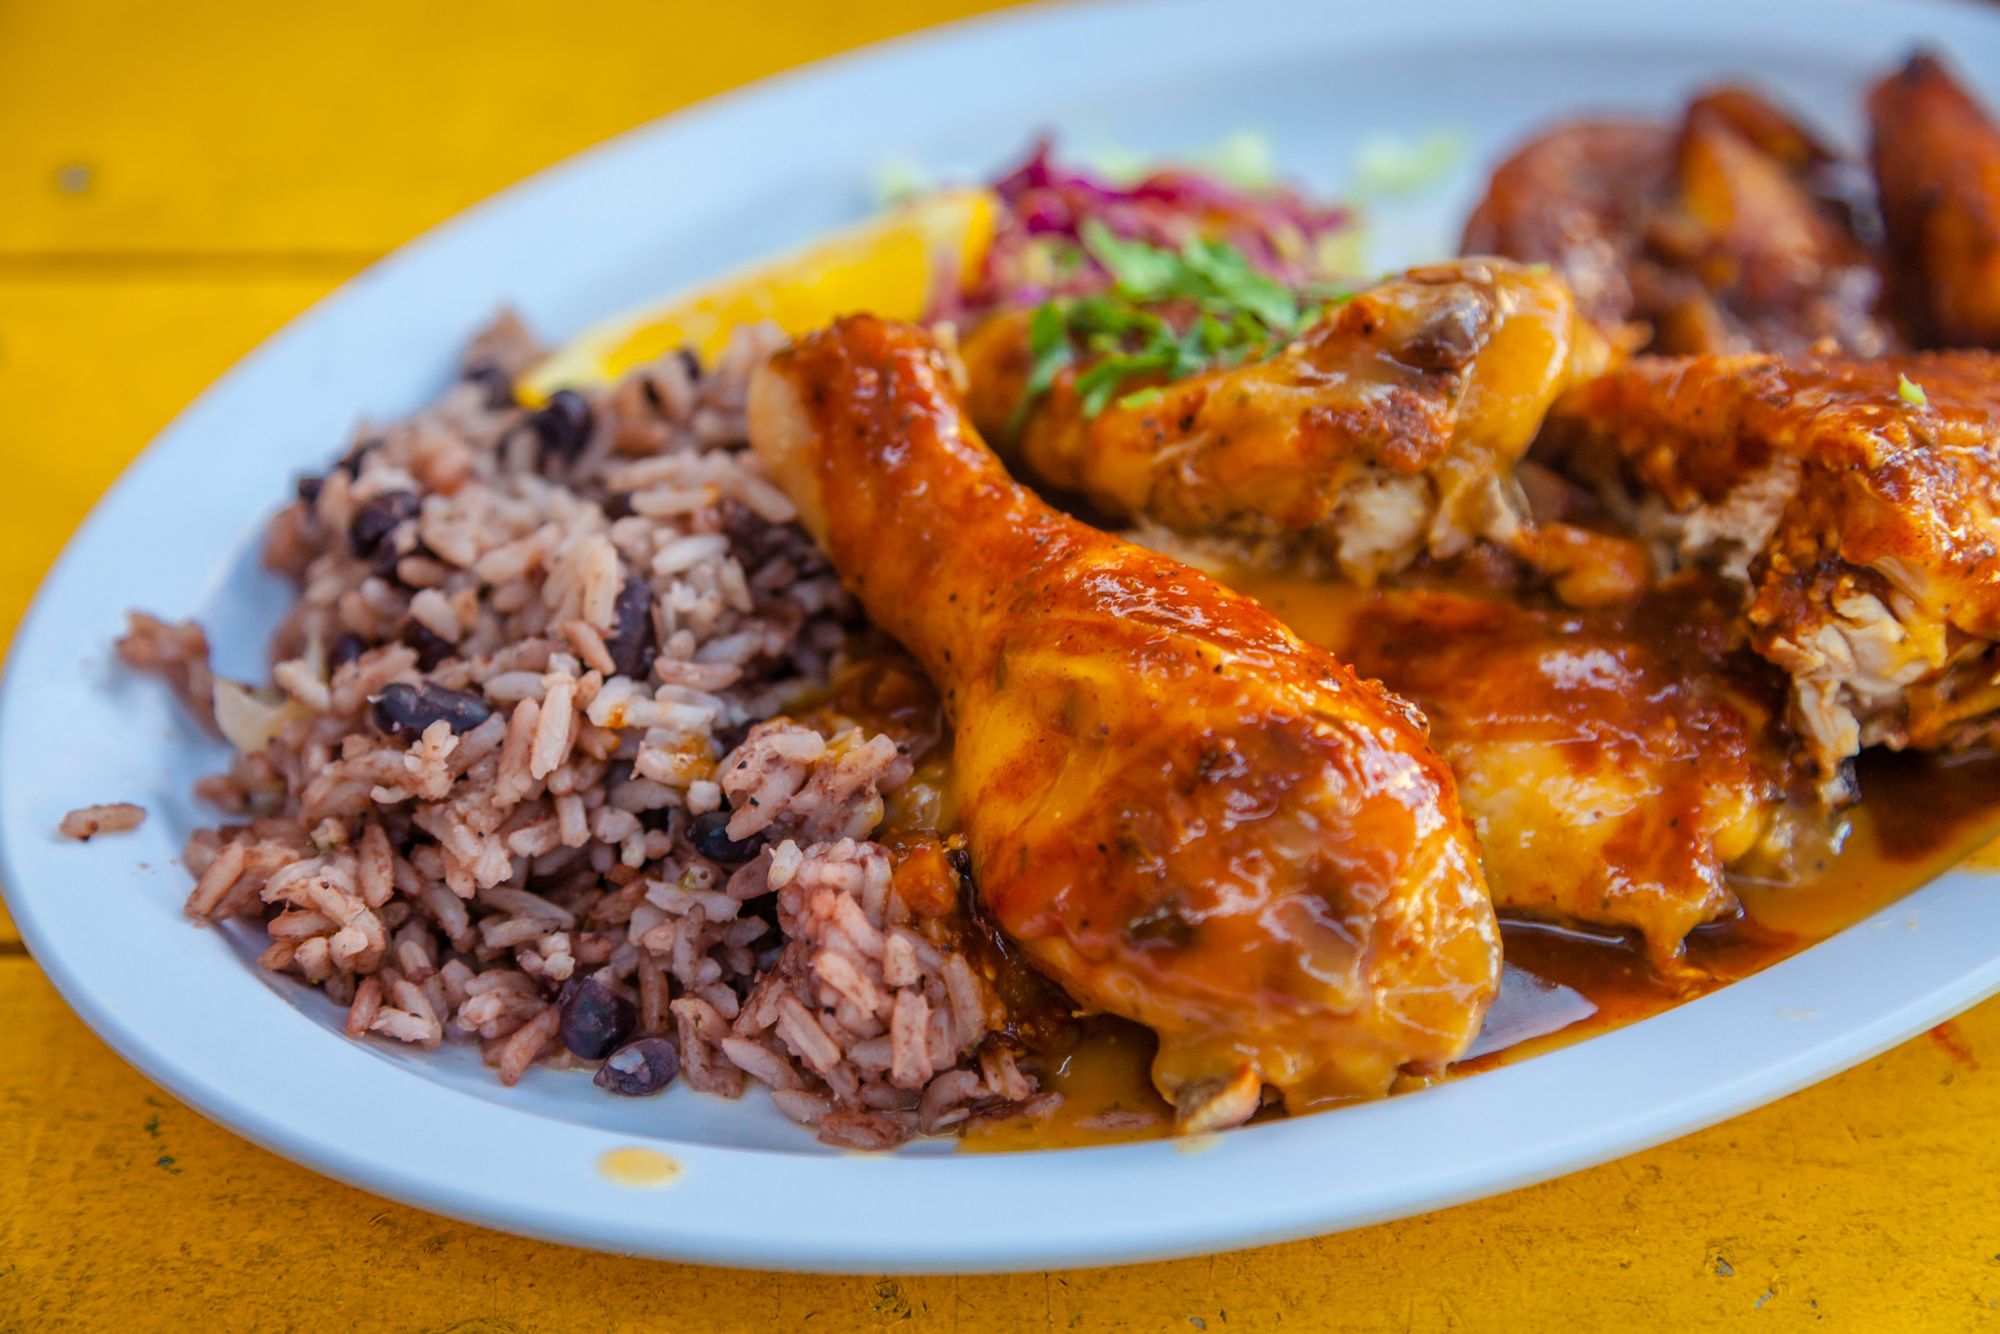 The Best Restaurants In Jamaica To Try During Your Caribbean Getaway